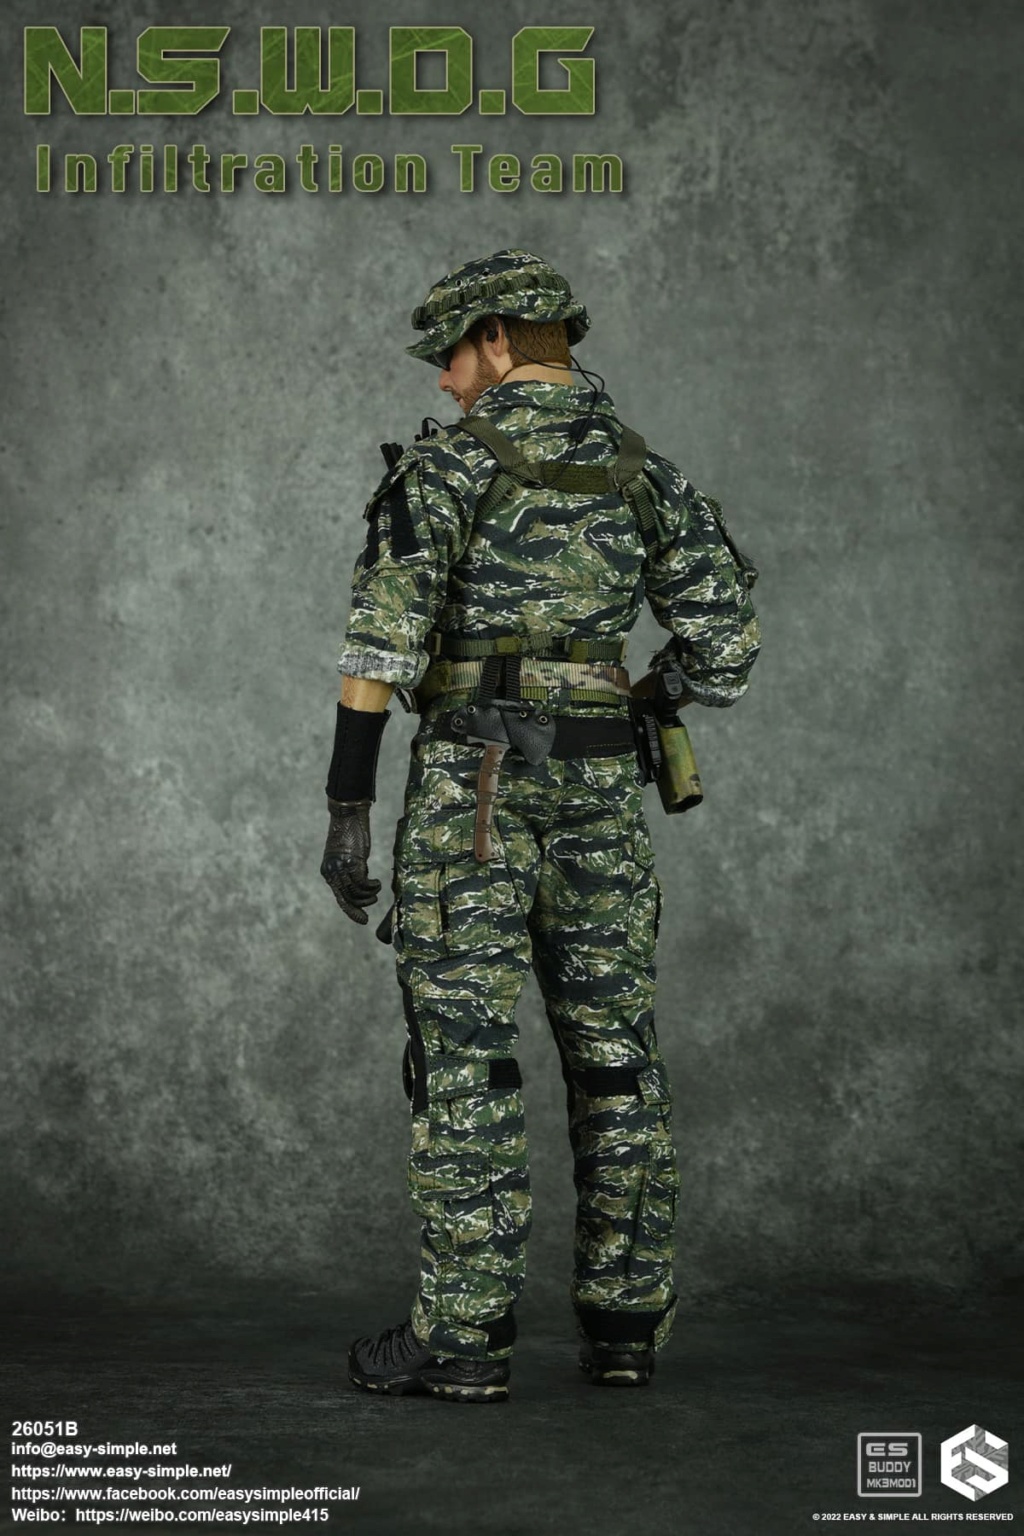 InfilitrationTeam - NEW PRODUCT: EASY AND SIMPLE 1/6 SCALE FIGURE: N.S.W.D.G INFILTRATION TEAM - (2 Versions) 7603